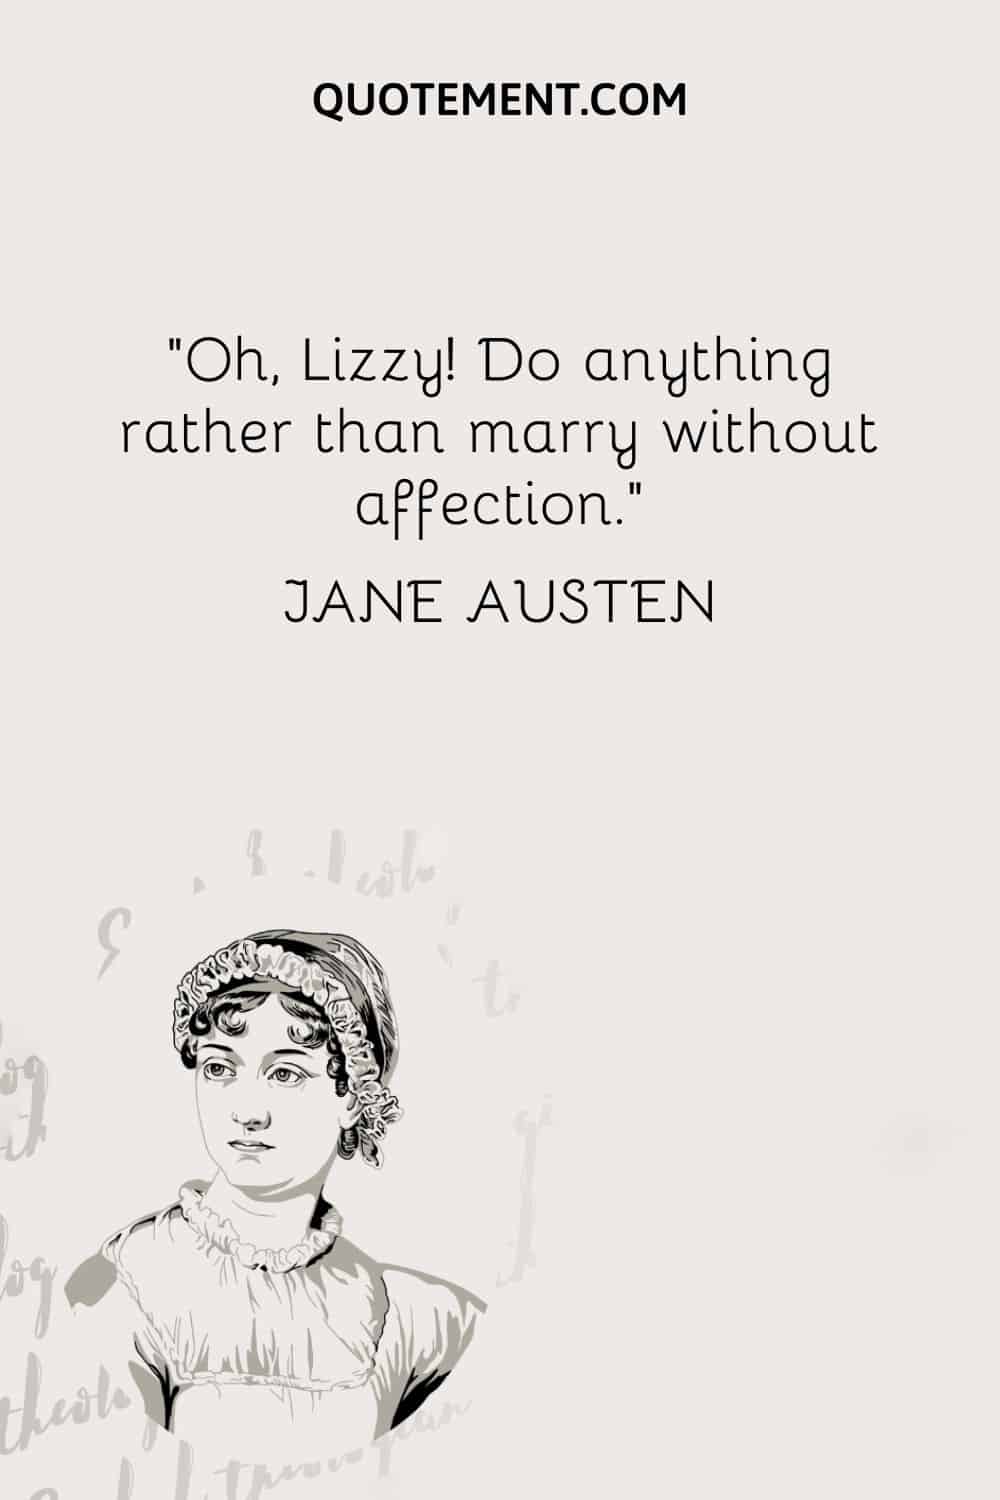 Oh, Lizzy! Do anything rather than marry without affection. — Jane Austen